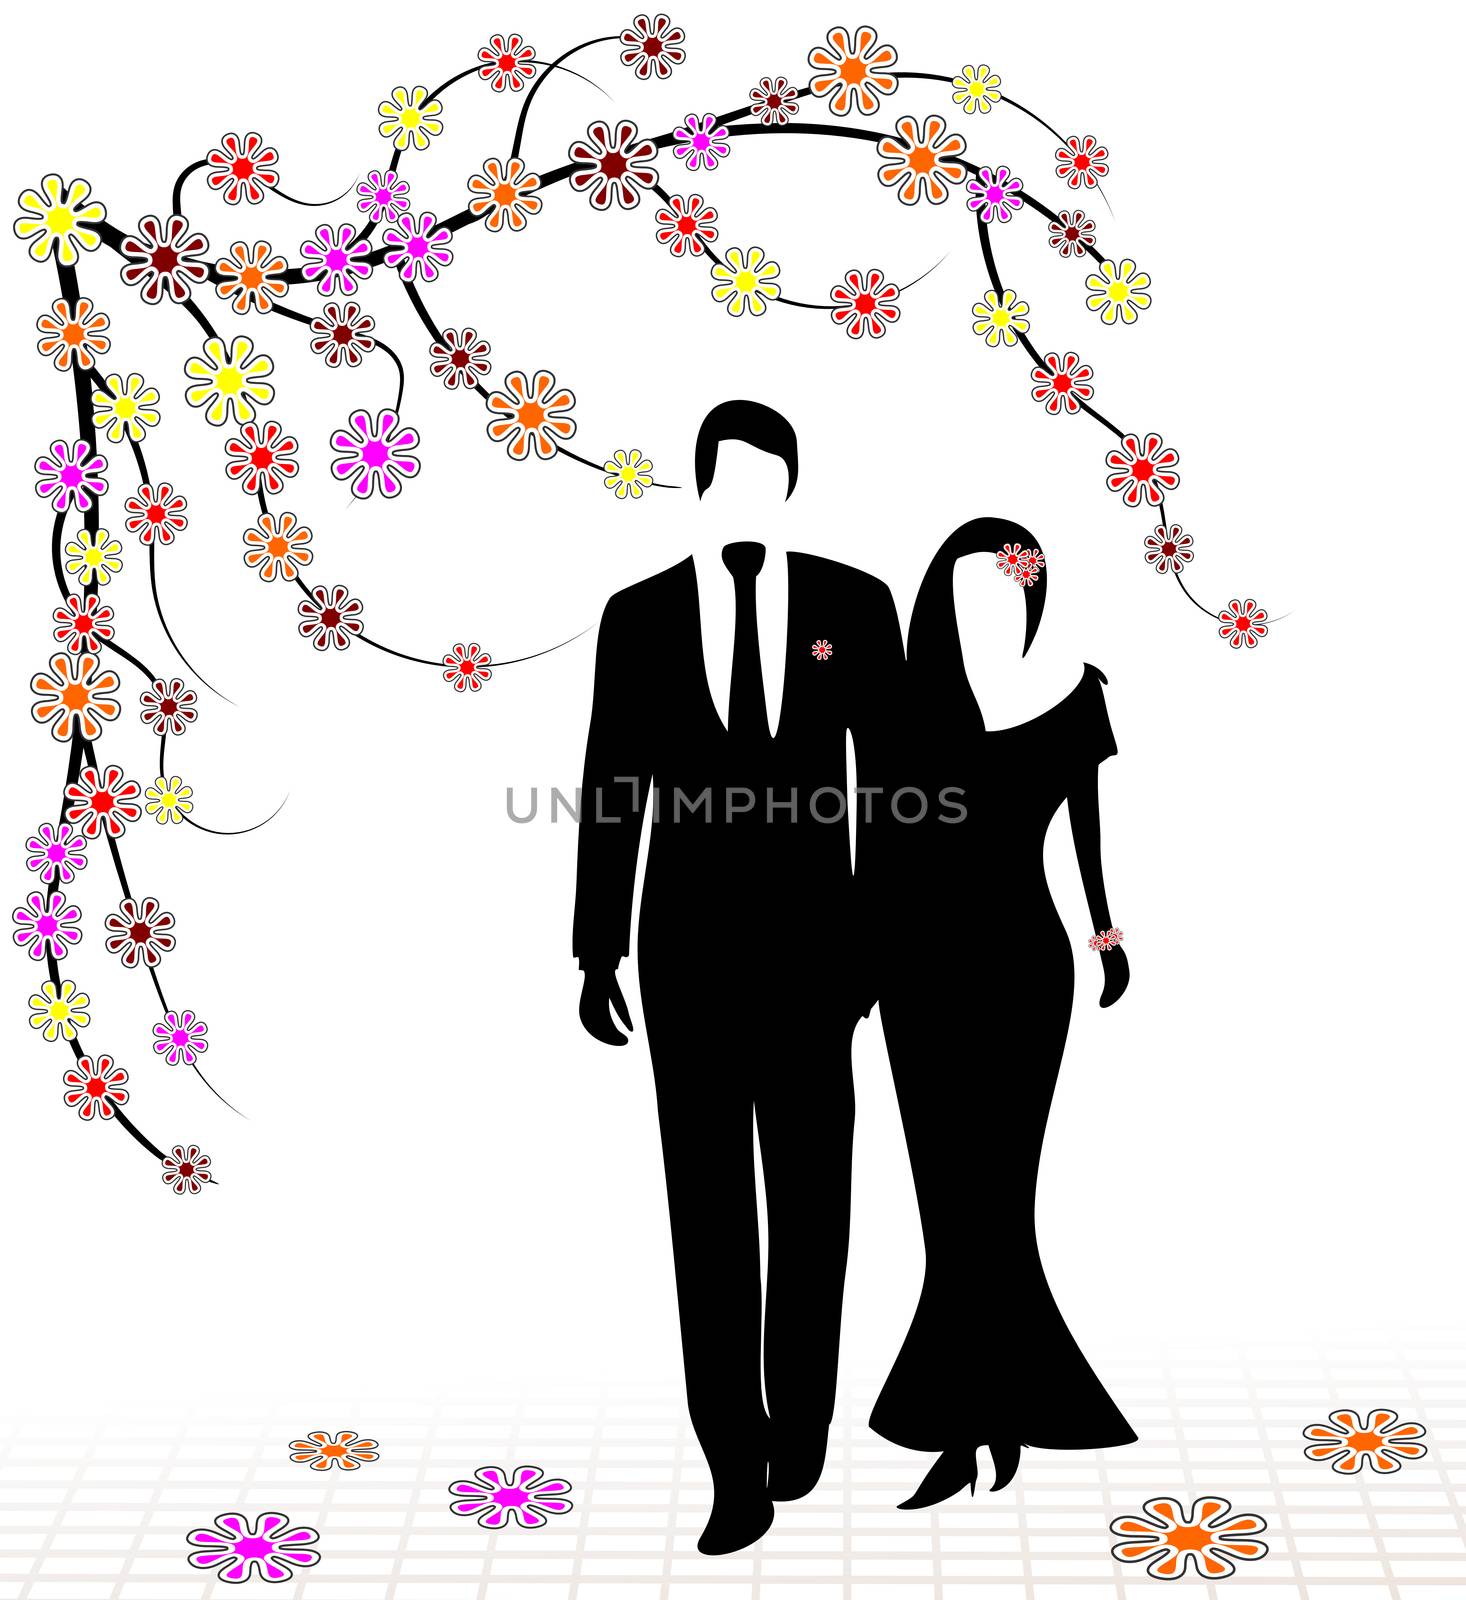 Spring wedding illustrated with silhouettes of a couple romantically posing under a branch full of flowers
